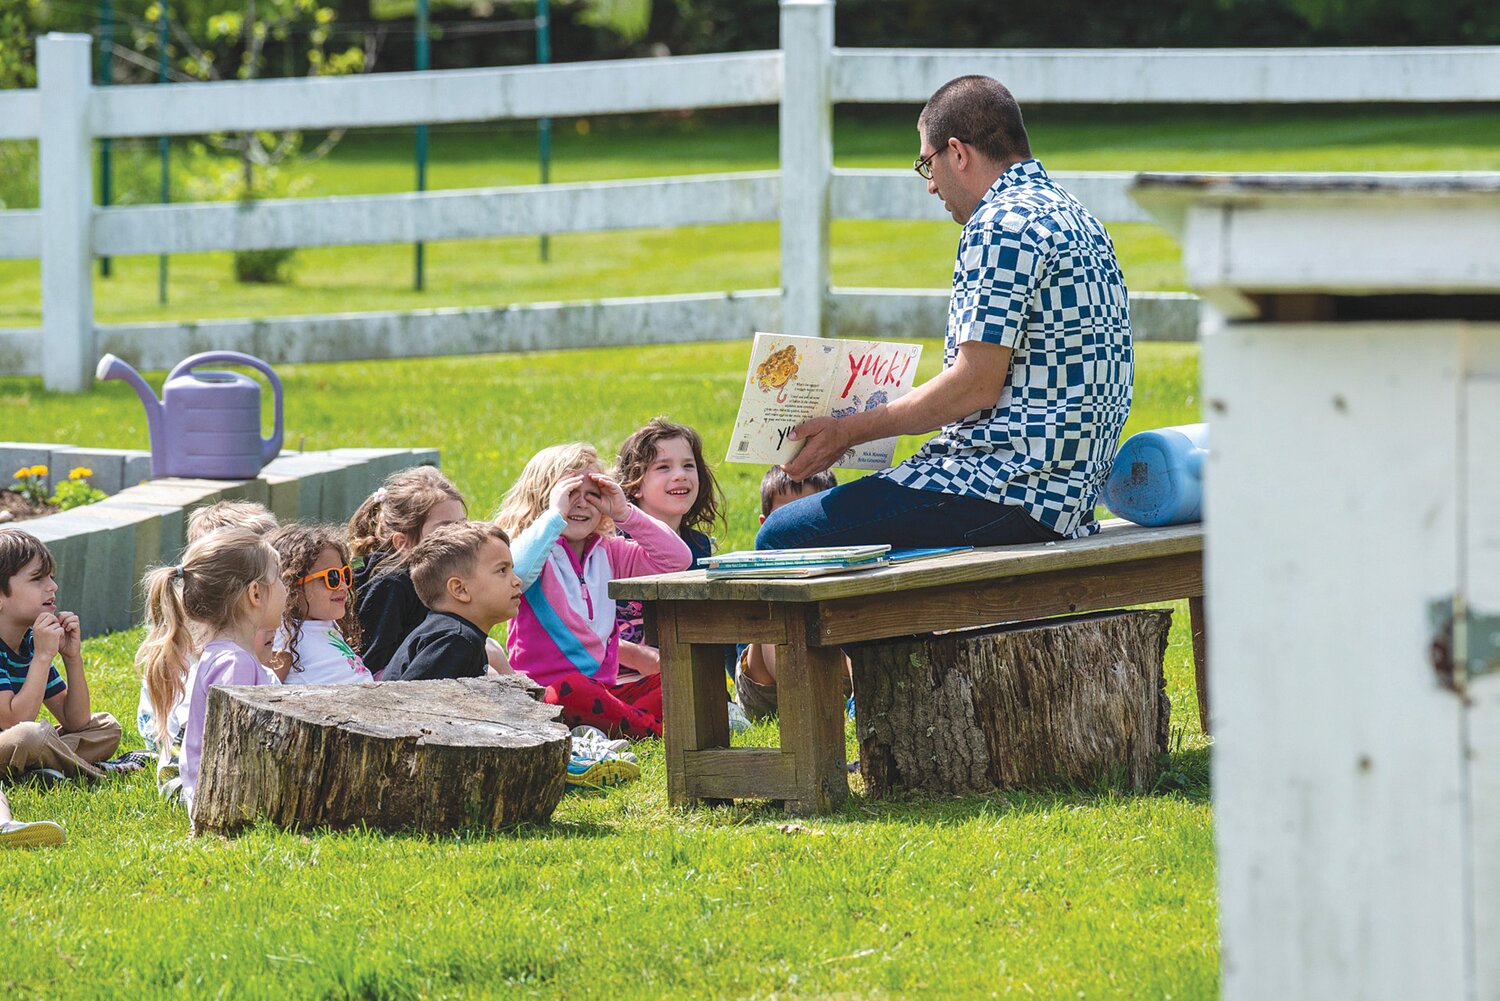 Pennfield School has made outdoor learning a core part of its curriculum, with classes often heading outside for reading, art, science lessons and more.